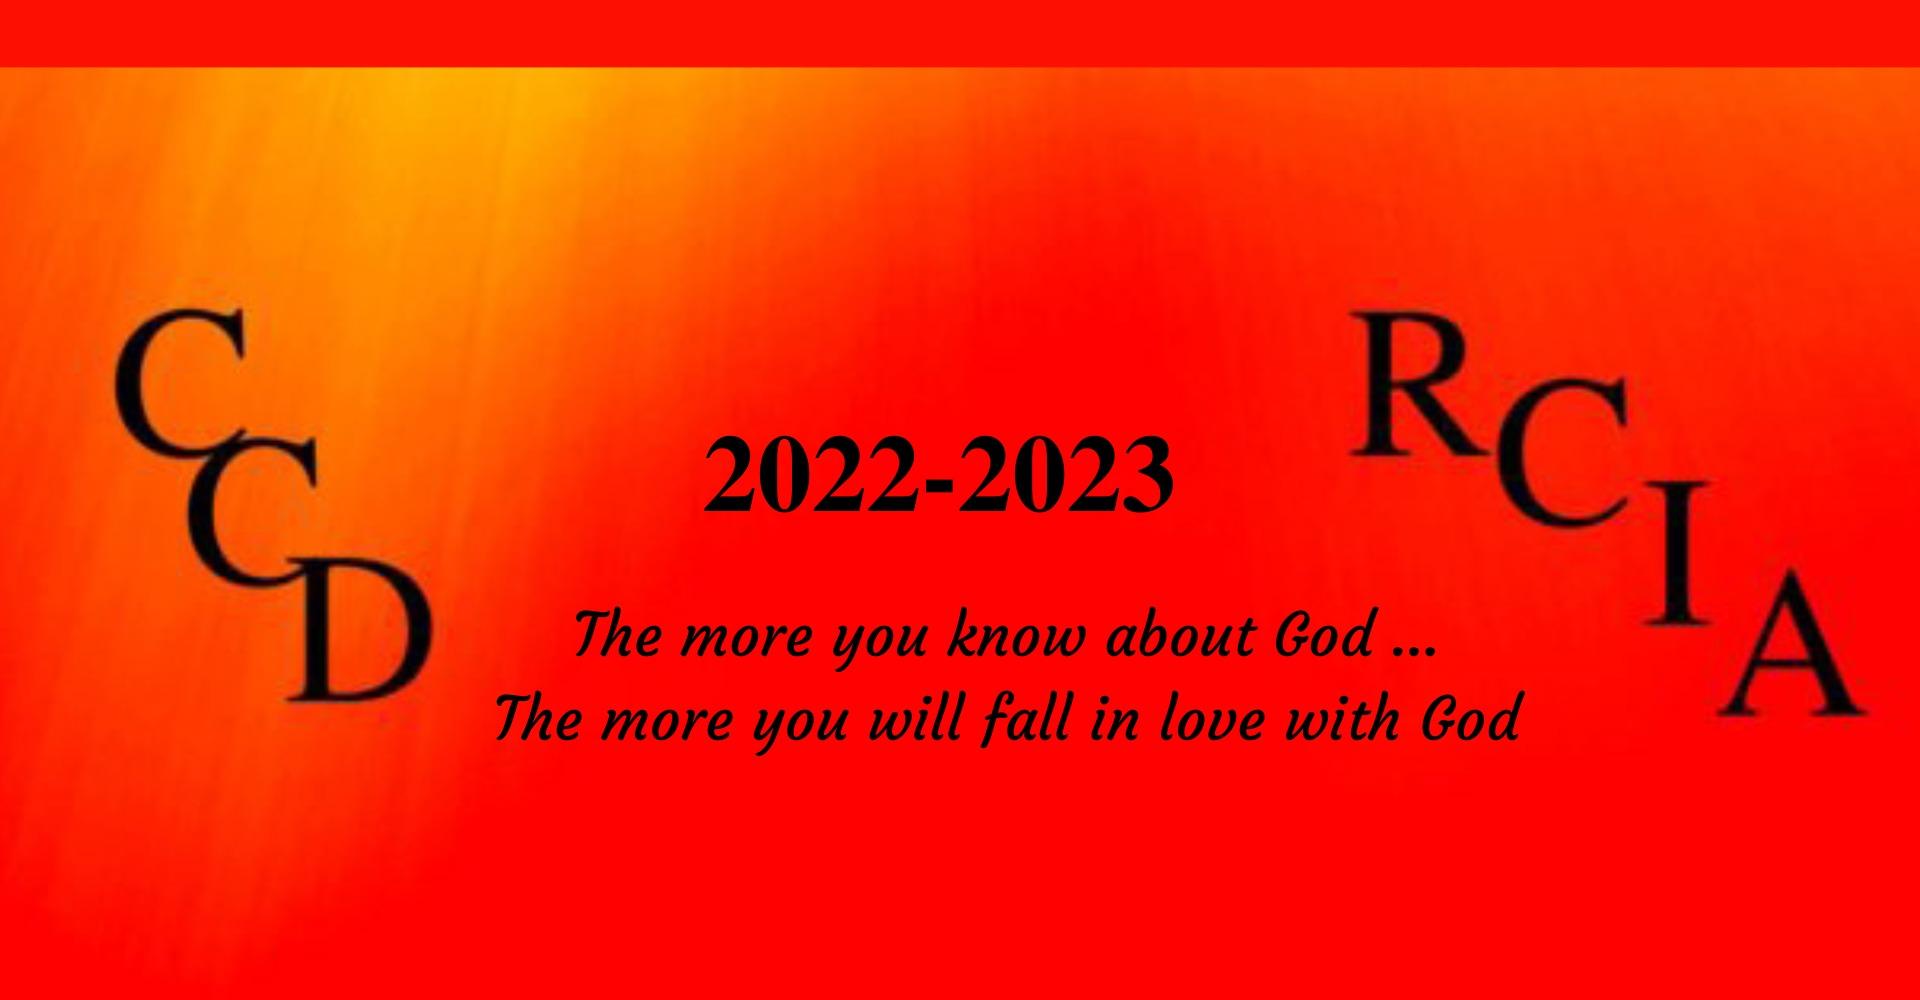 CCD RCIA Background 2022 2023 